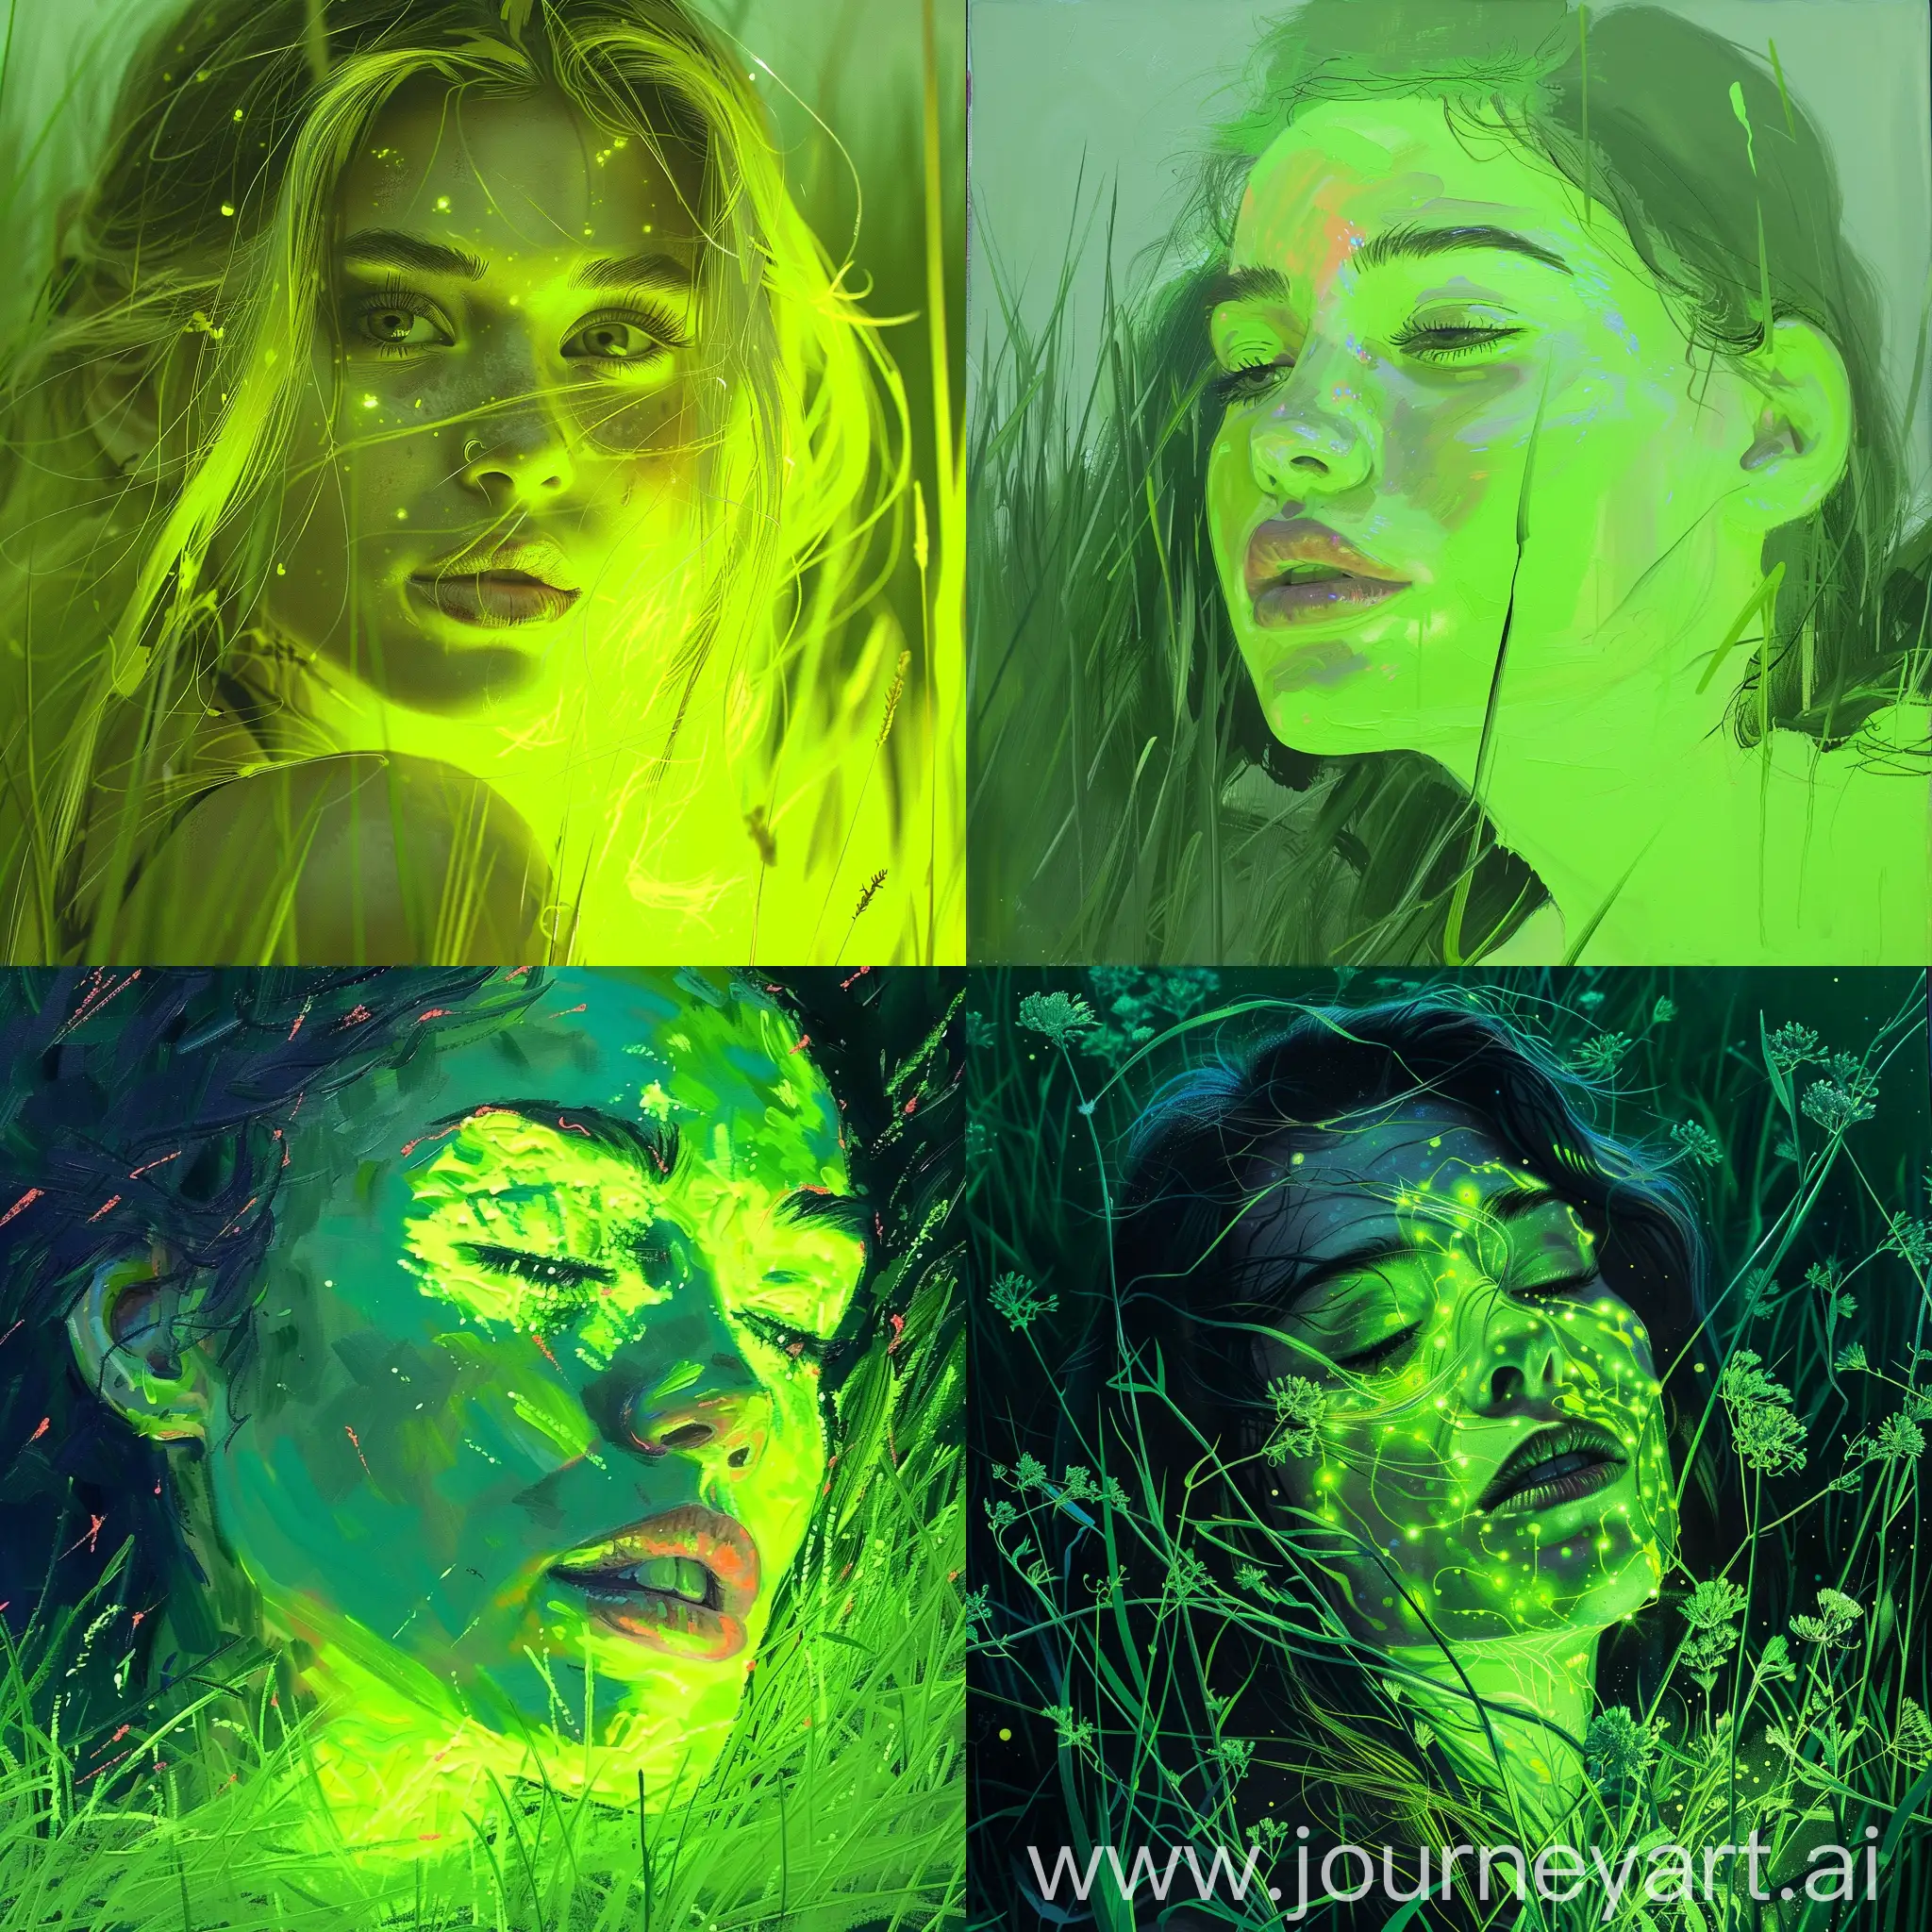 Glowing-Neon-Green-Lady-Melting-into-Pastel-Green-Grass